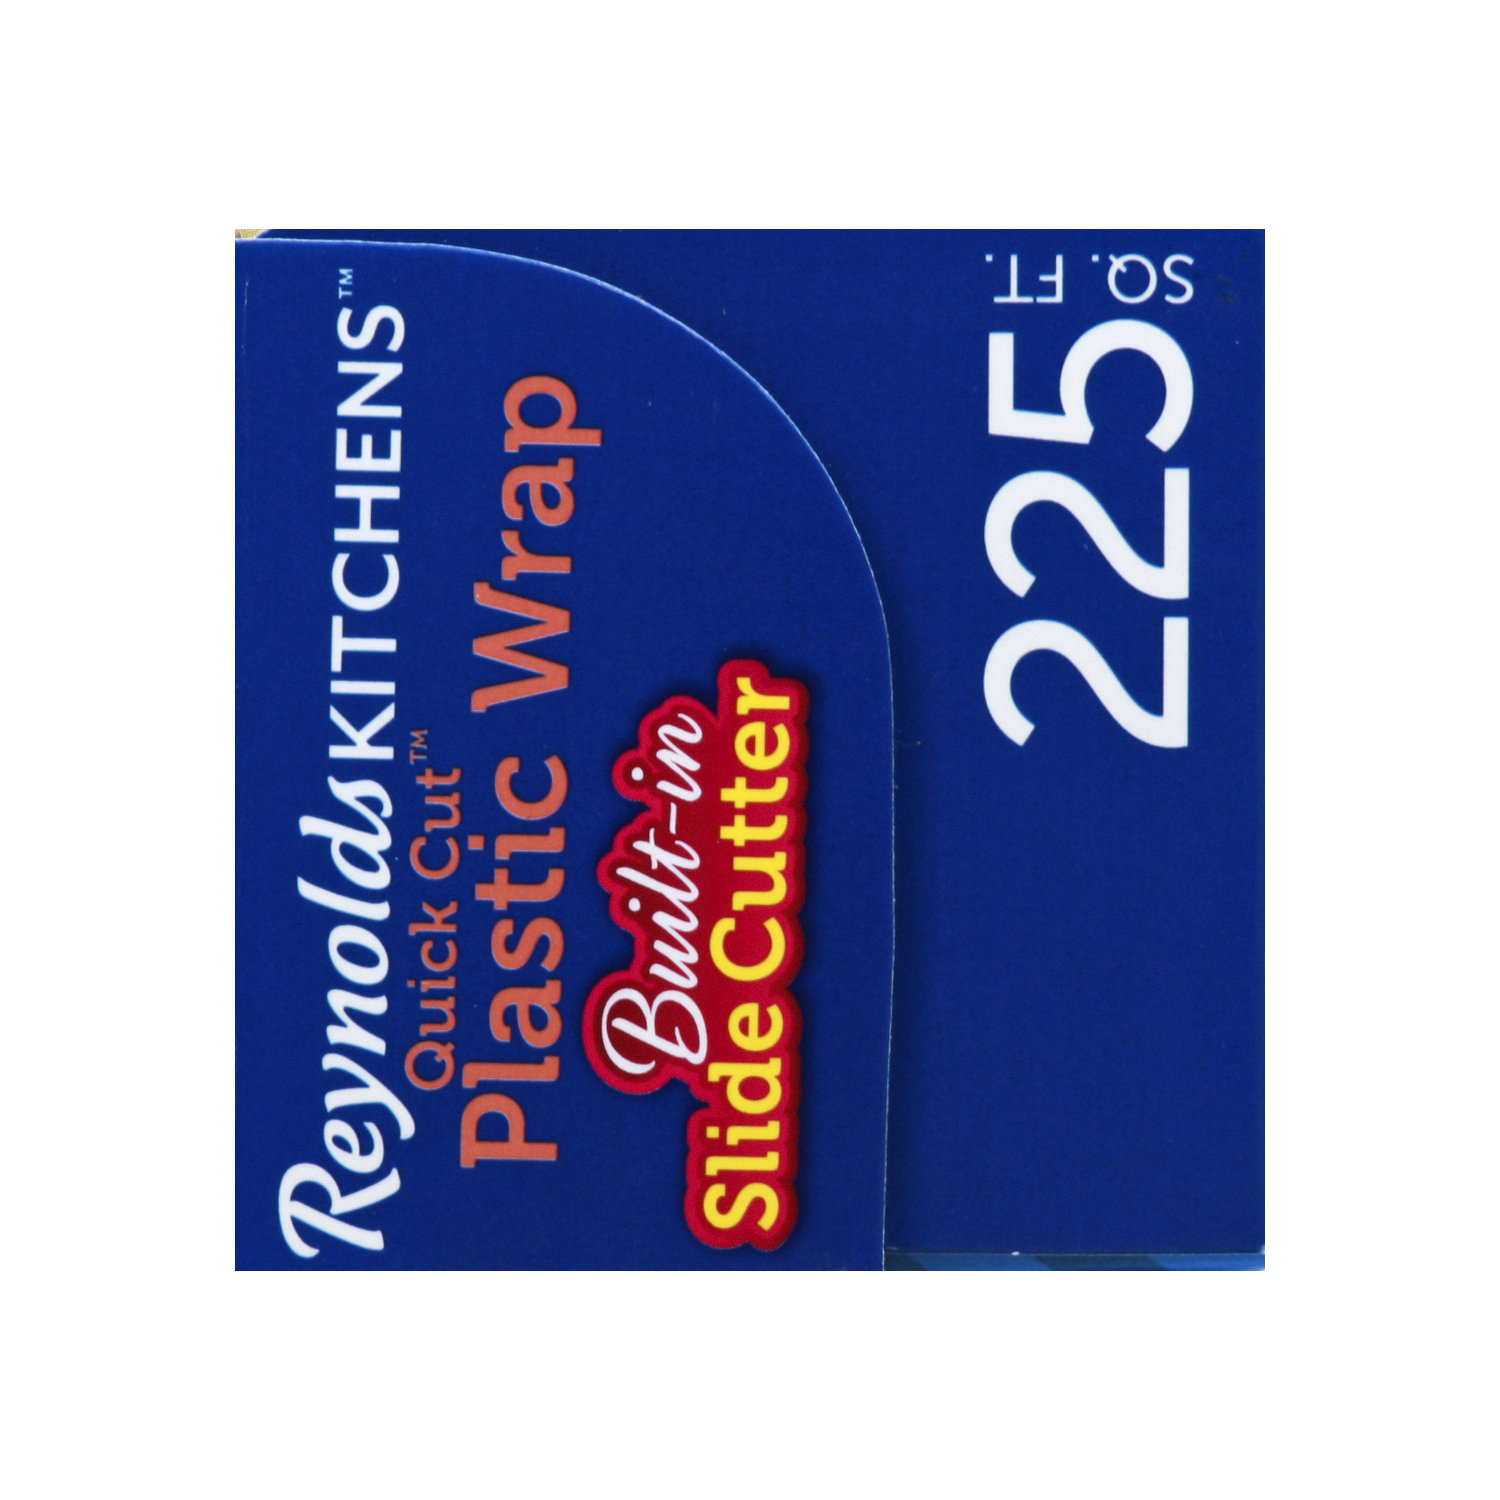 Reynolds Kitchens Quick Cut Plastic Wrap (225 Sq Ft (Pack of 4))